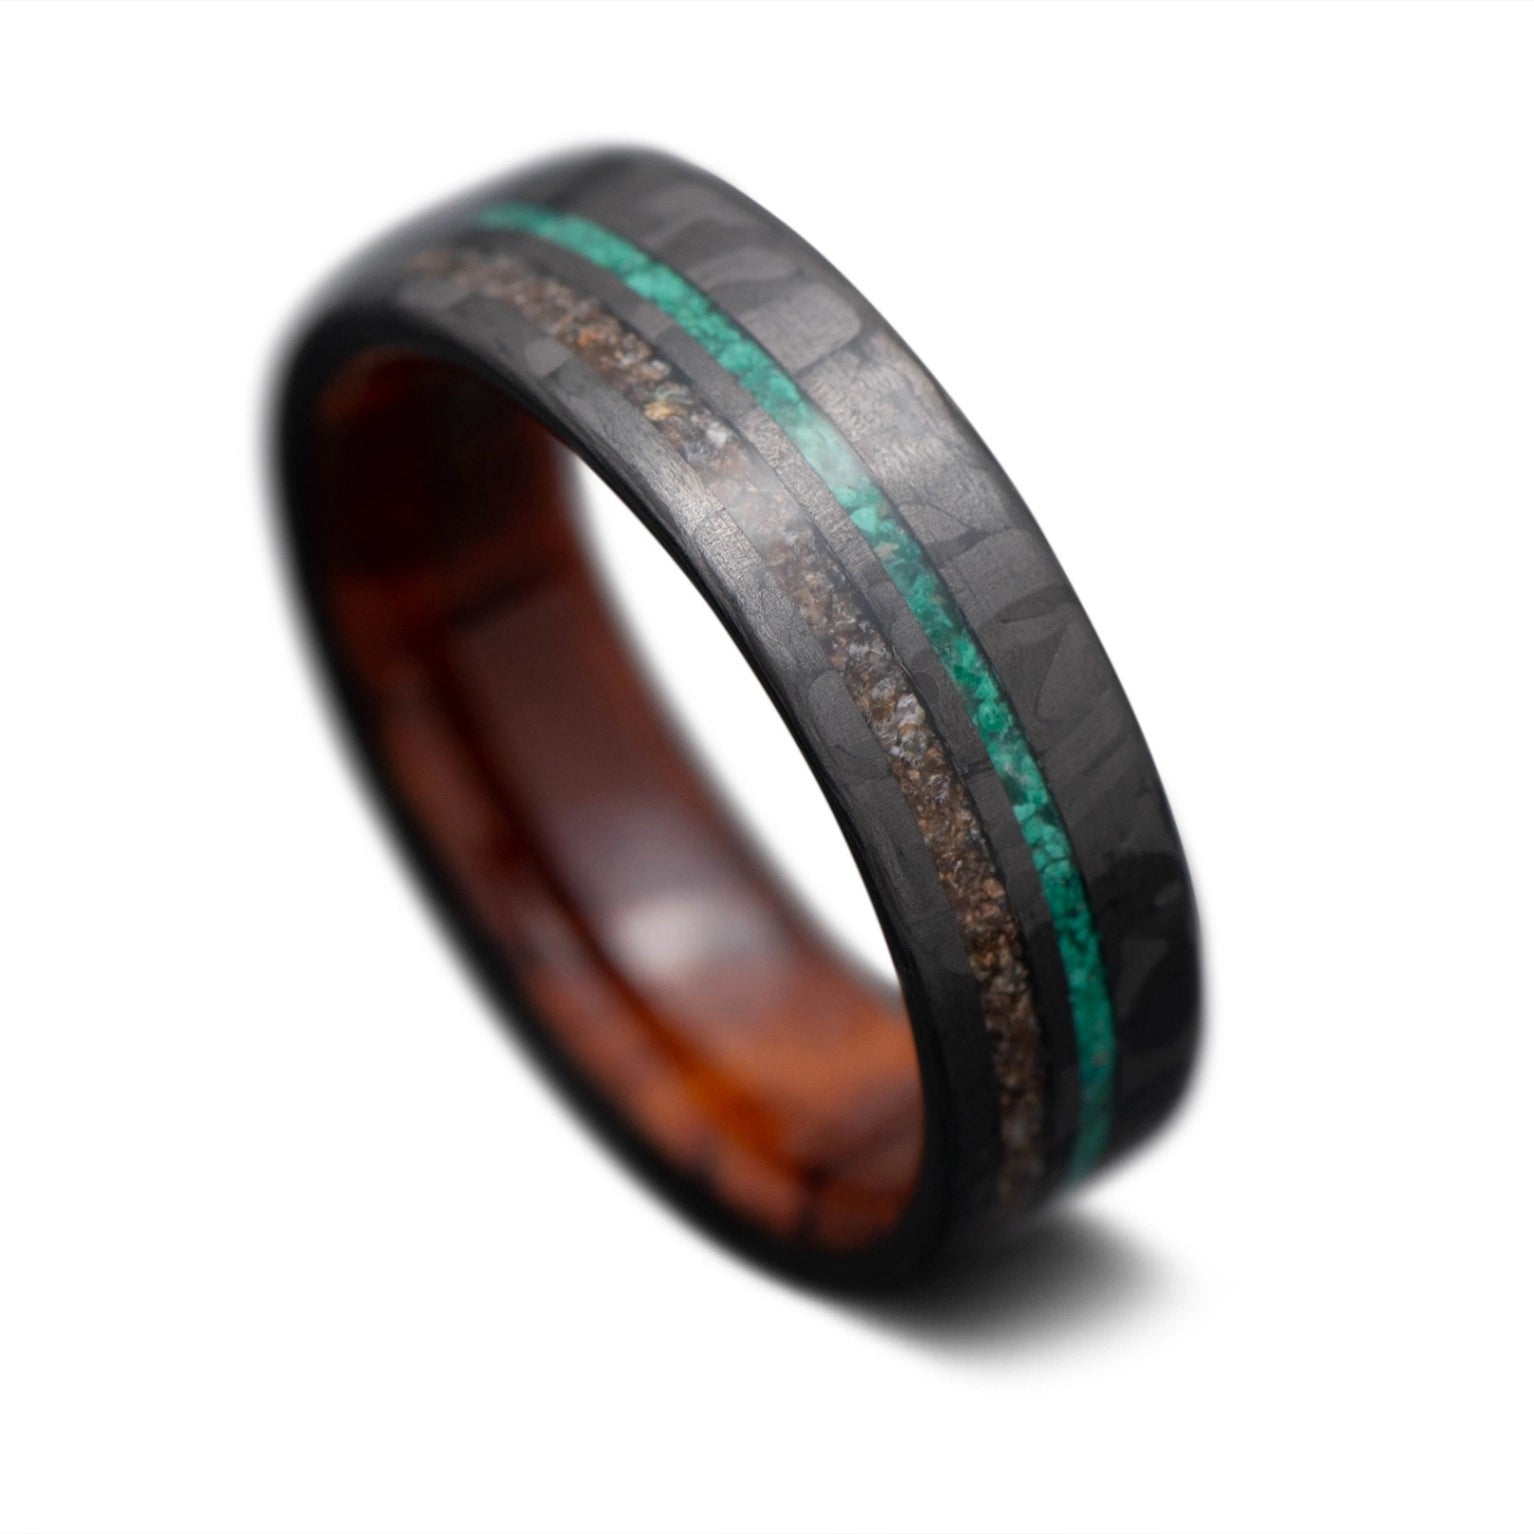 CarbonTwill Core Ring with Crushed T-Rex, Malachite inlay and  Thuya inner sleeve, 7mm -THE SEEKER